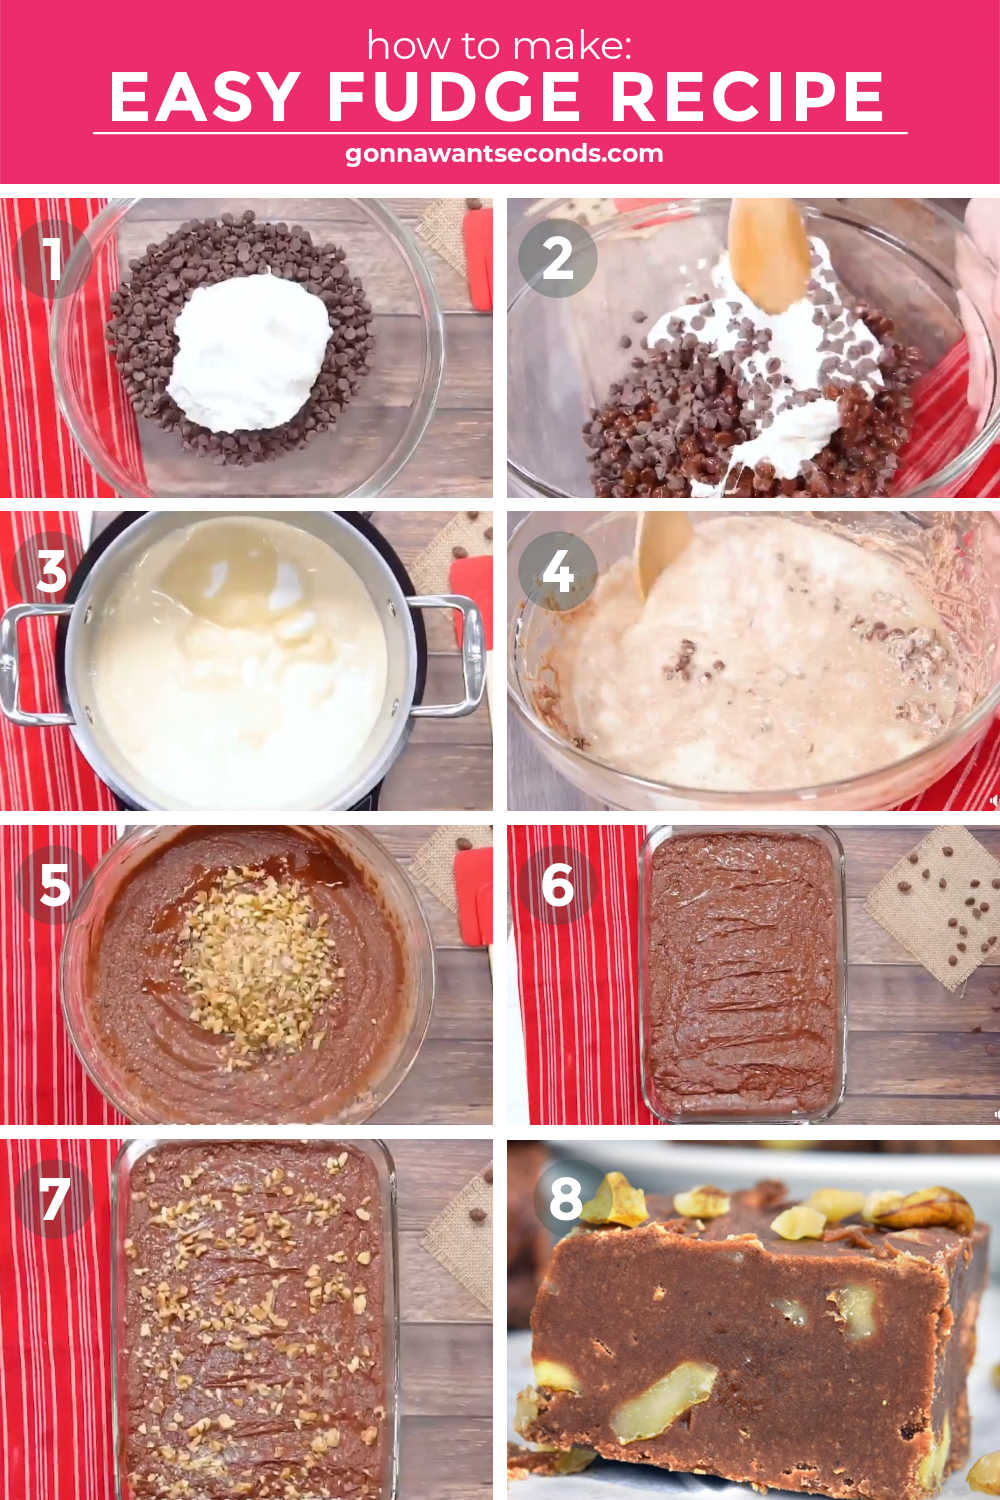 Step by step how to make easy fudge recipe